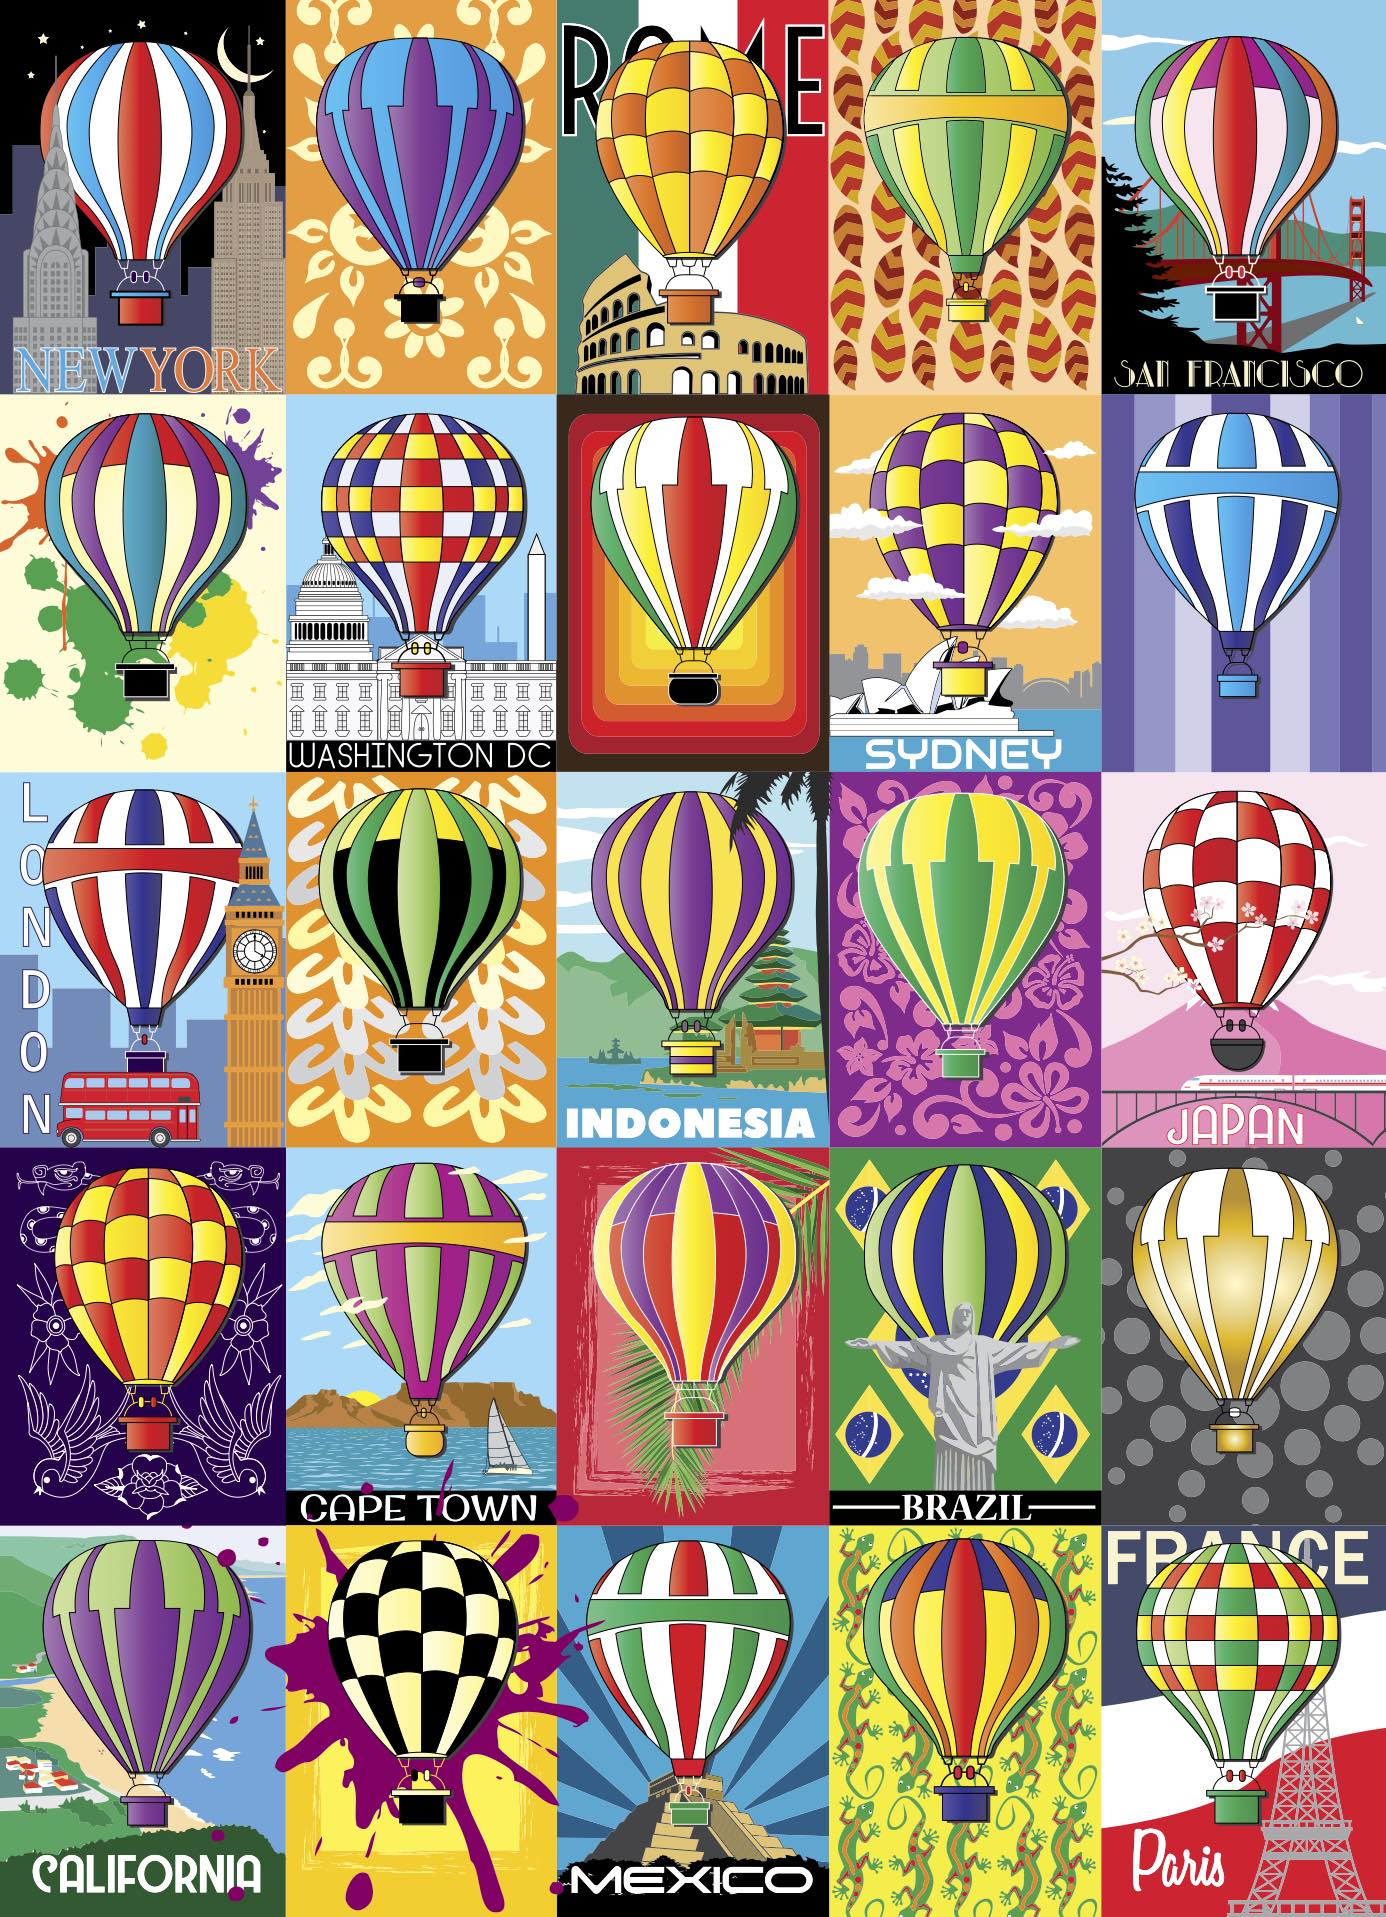 Hot Air Balloons 1000 Piece Jigsaw Puzzle - Because business IS personal Hennessy Puzzles